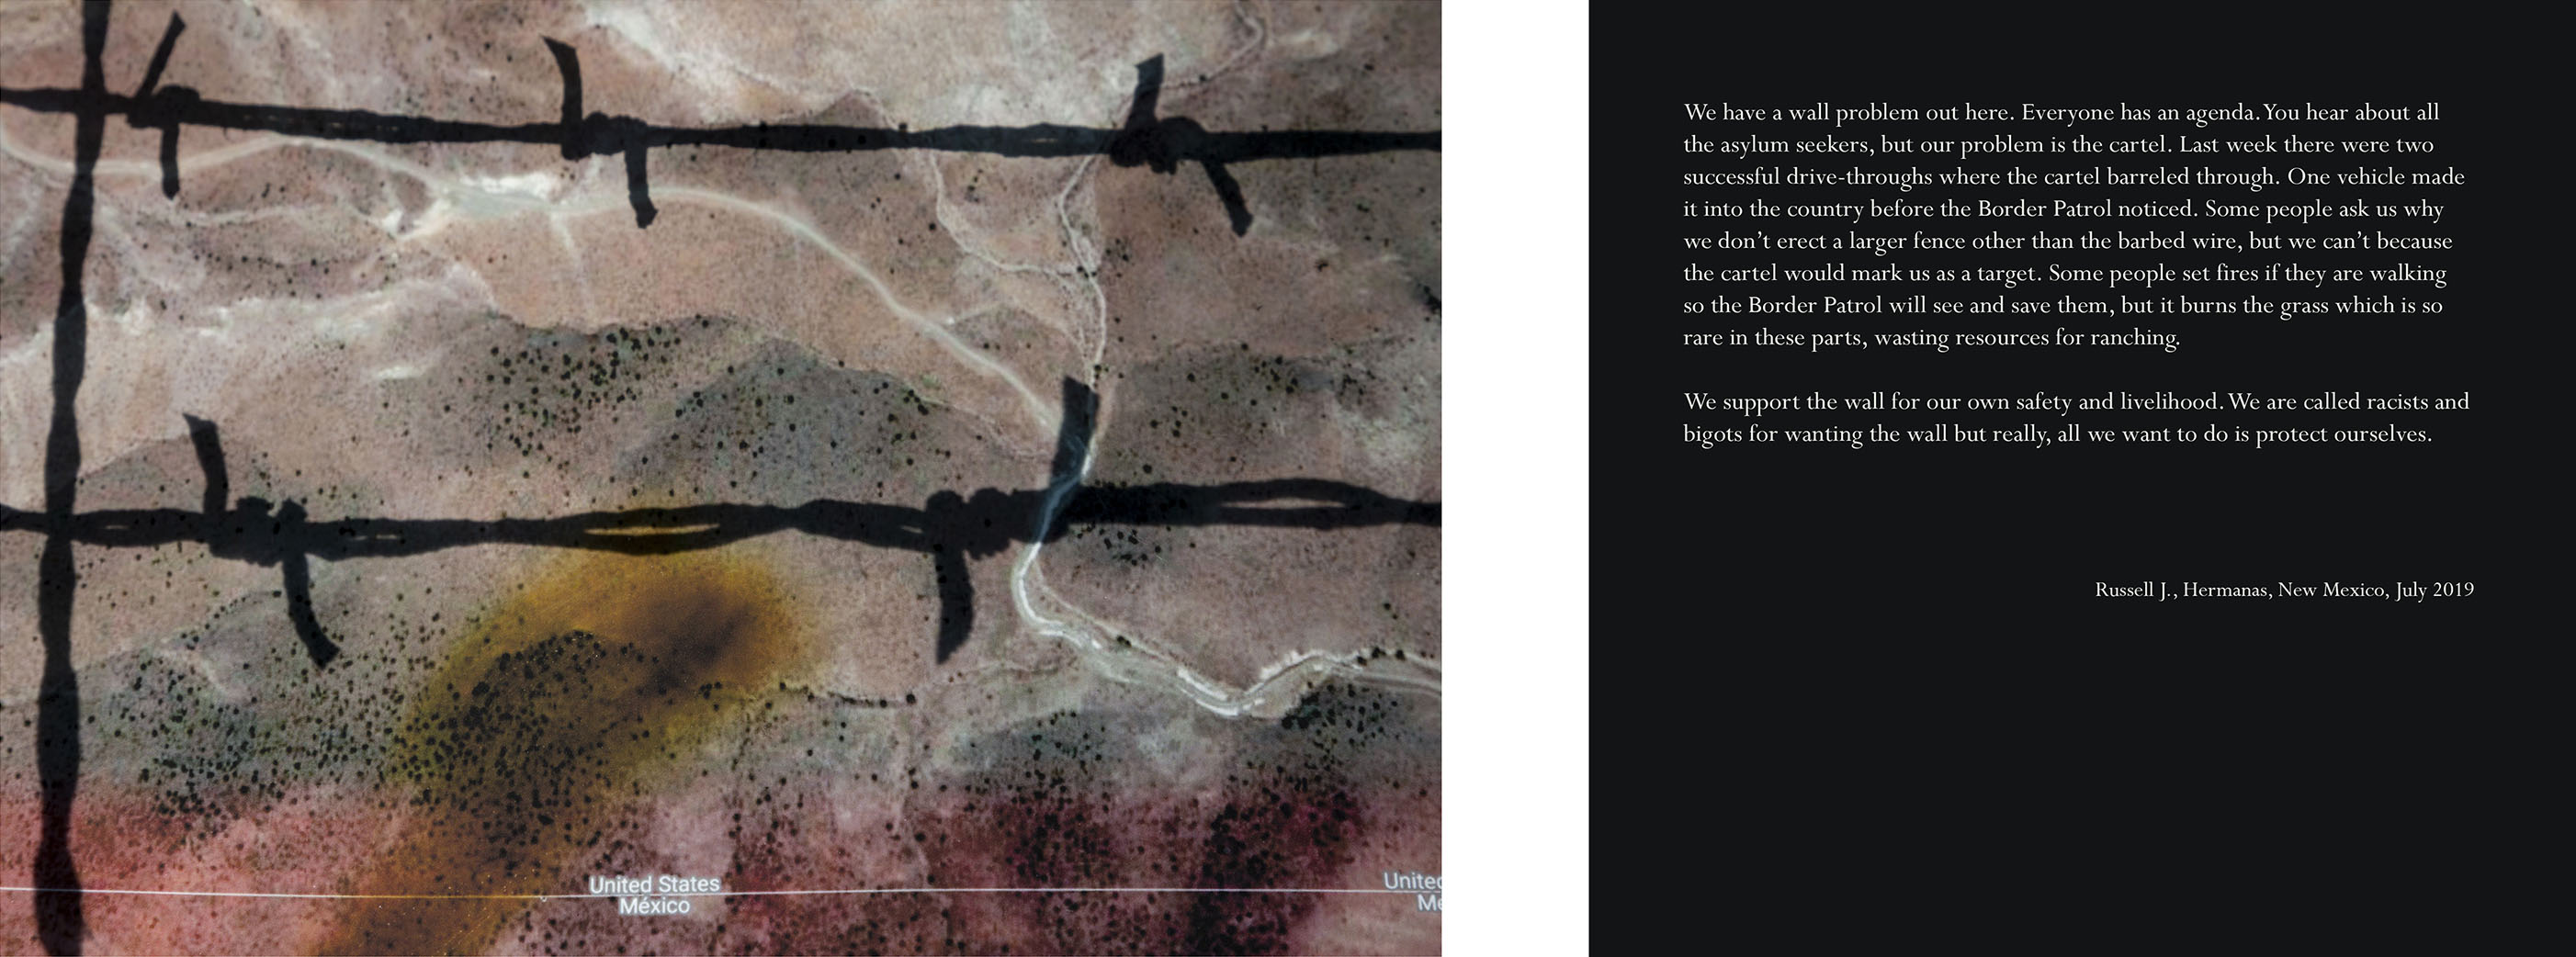 aerial map showing the border between United States and Mexico overlaid with the shadow of a barbed wire fence